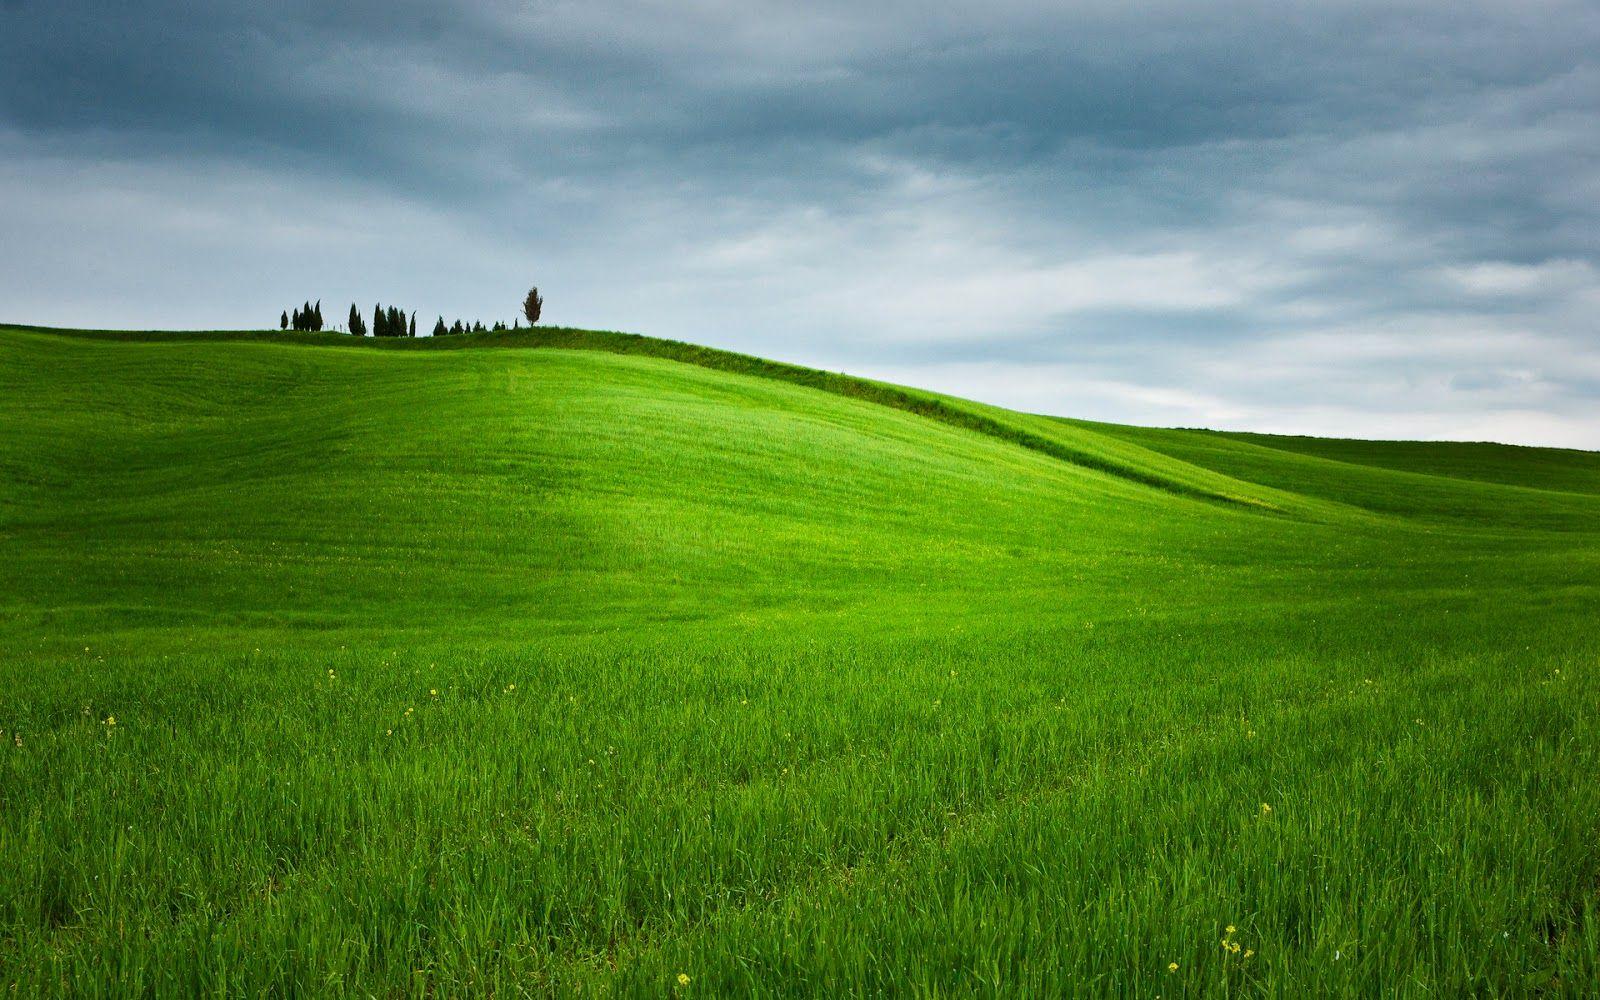 live nature wallpaper for windows 7